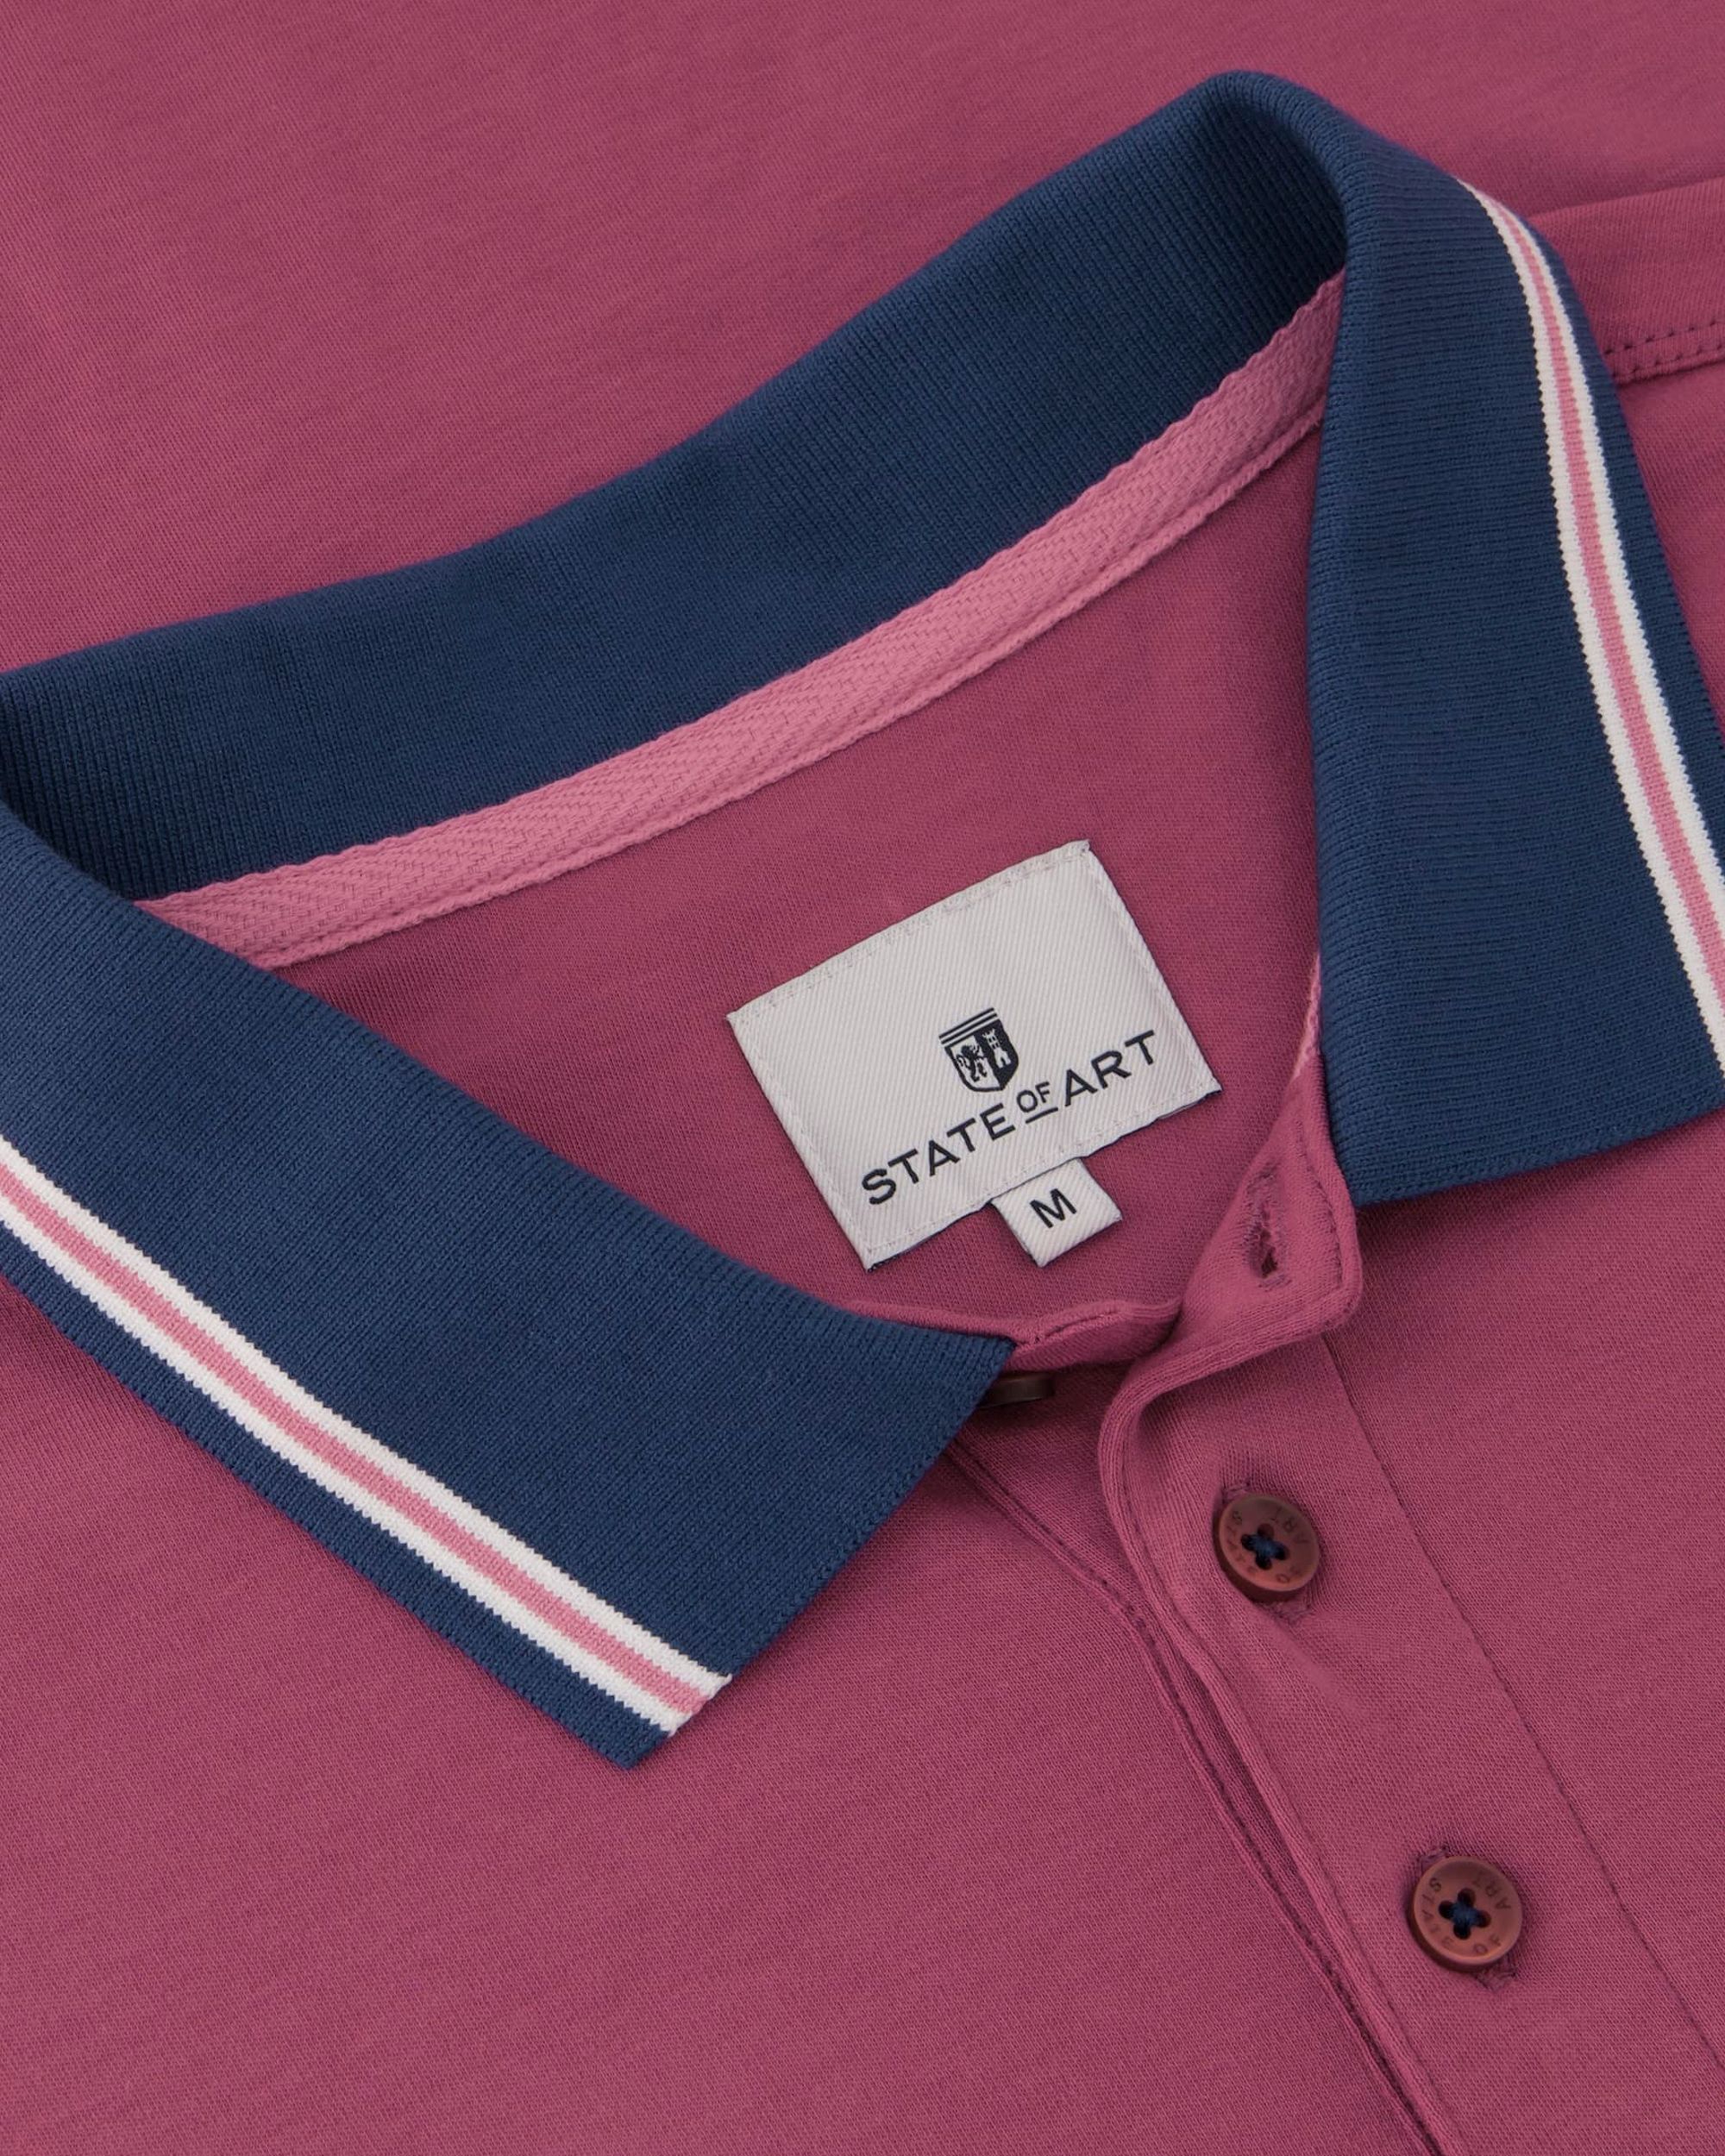 State of Art Polo KM Donker rood 093430-001-4XL